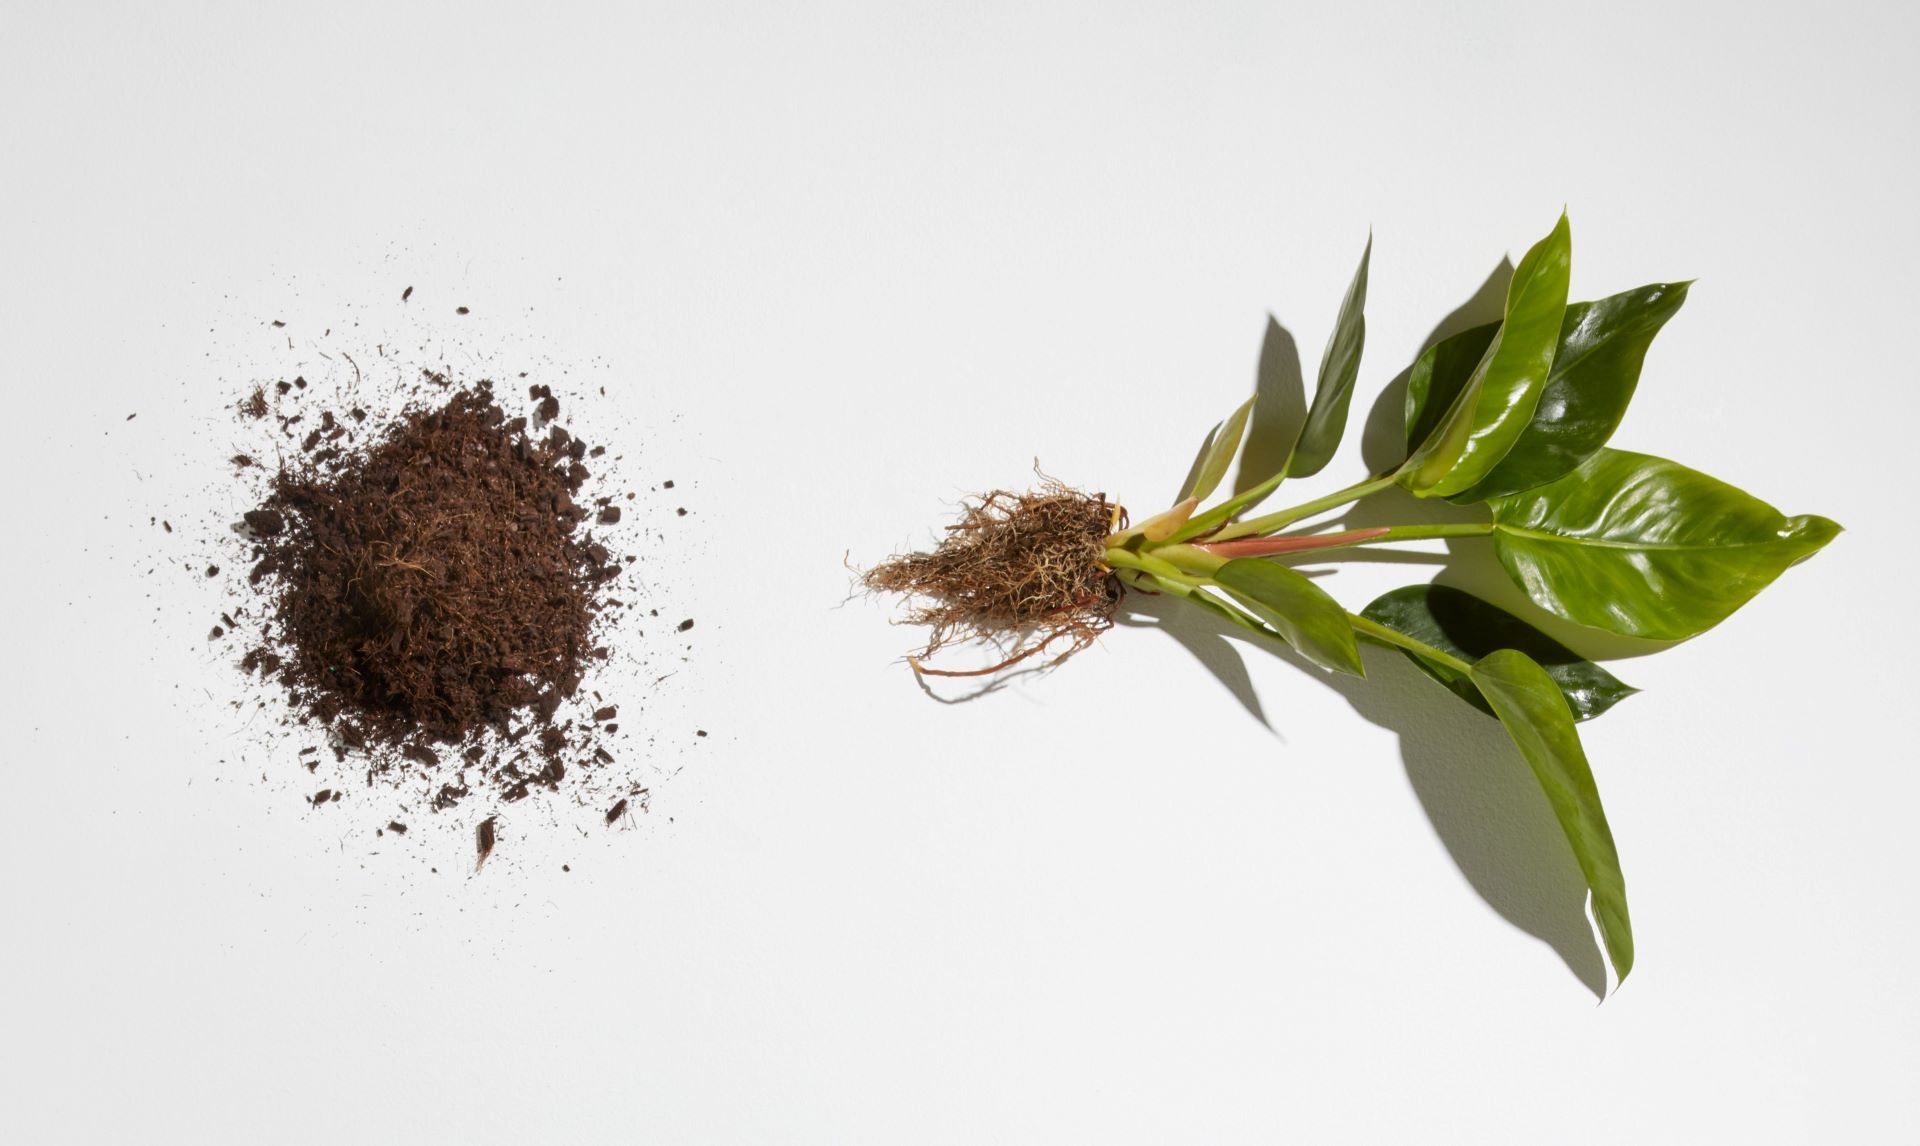 White background with pile of dirt and green leafy plant lying horizontally with roots pointing towards dirt